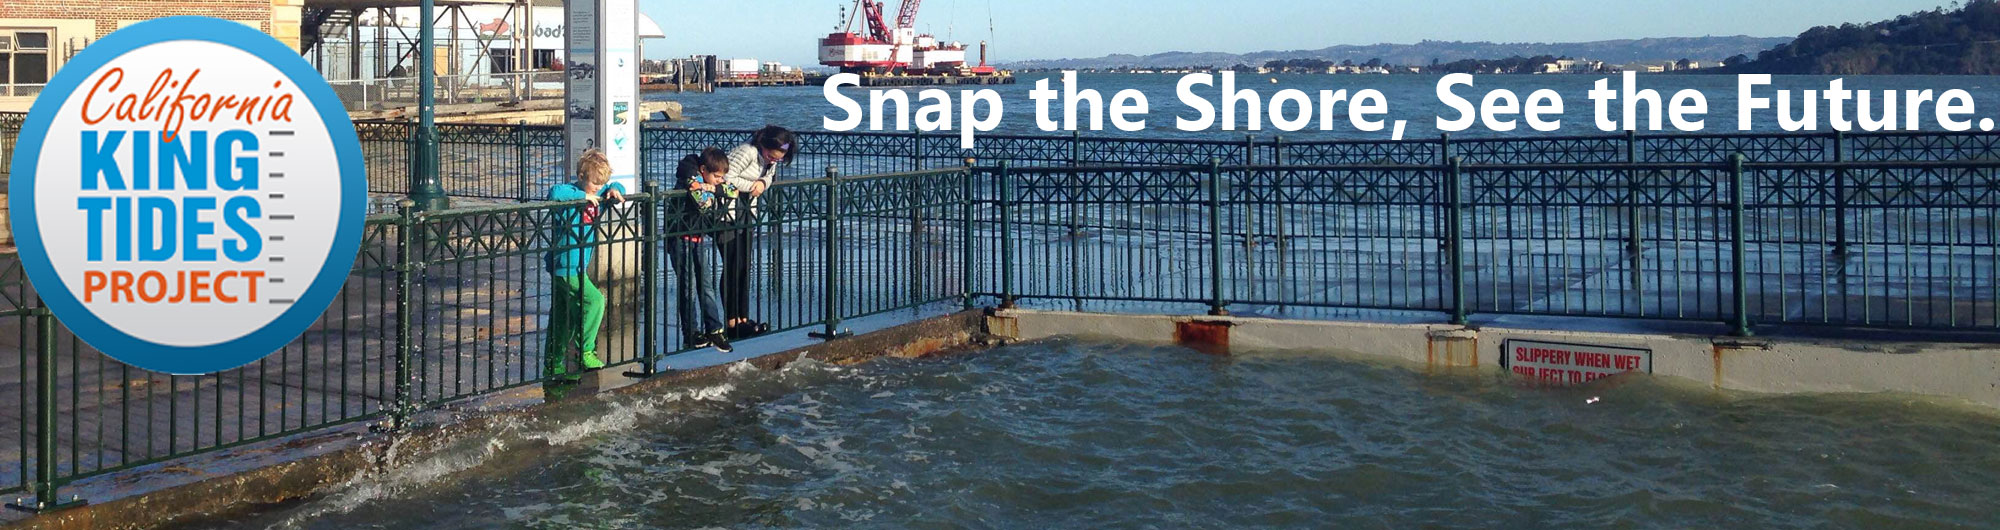 California King Tides Project. Snap the Shore, See the Future. A family watches the king tides at San Francisco's Pier 14